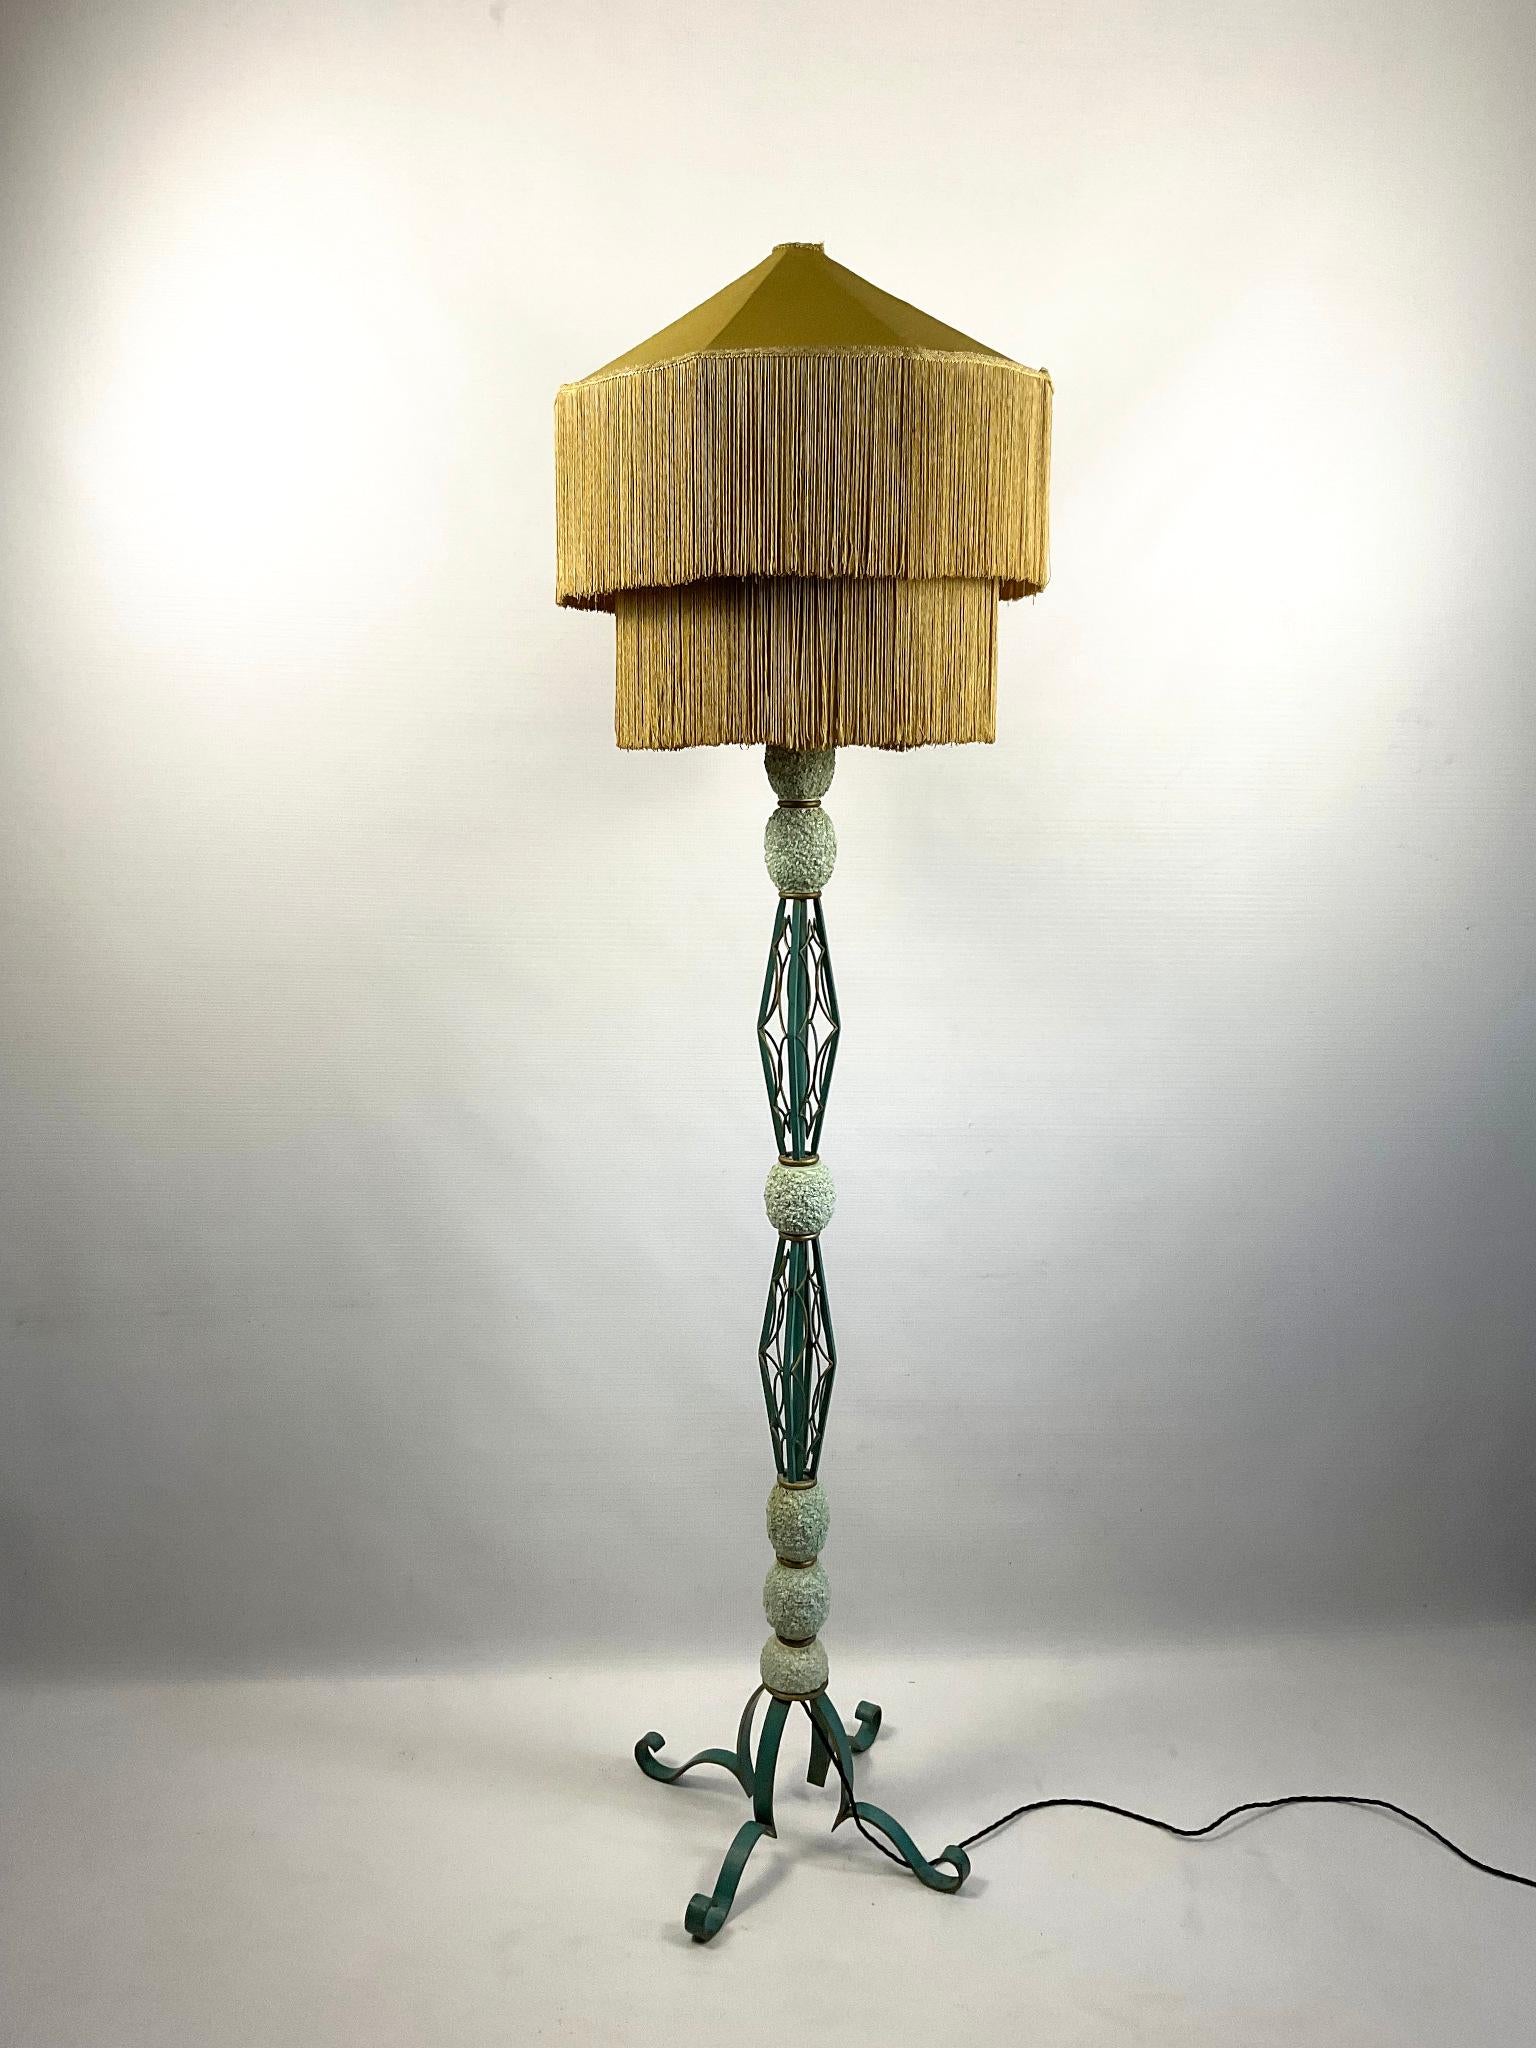 French floor lamp from the 1940s in wrought iron with a turquoise and gold enamel finish. Adorned with elliptical ceramic eggshell decorations.
Art deco two-tier silk bohemian fringed lampshade
Lampshade dimensions :
Top Diameter : 50cm
Bottom